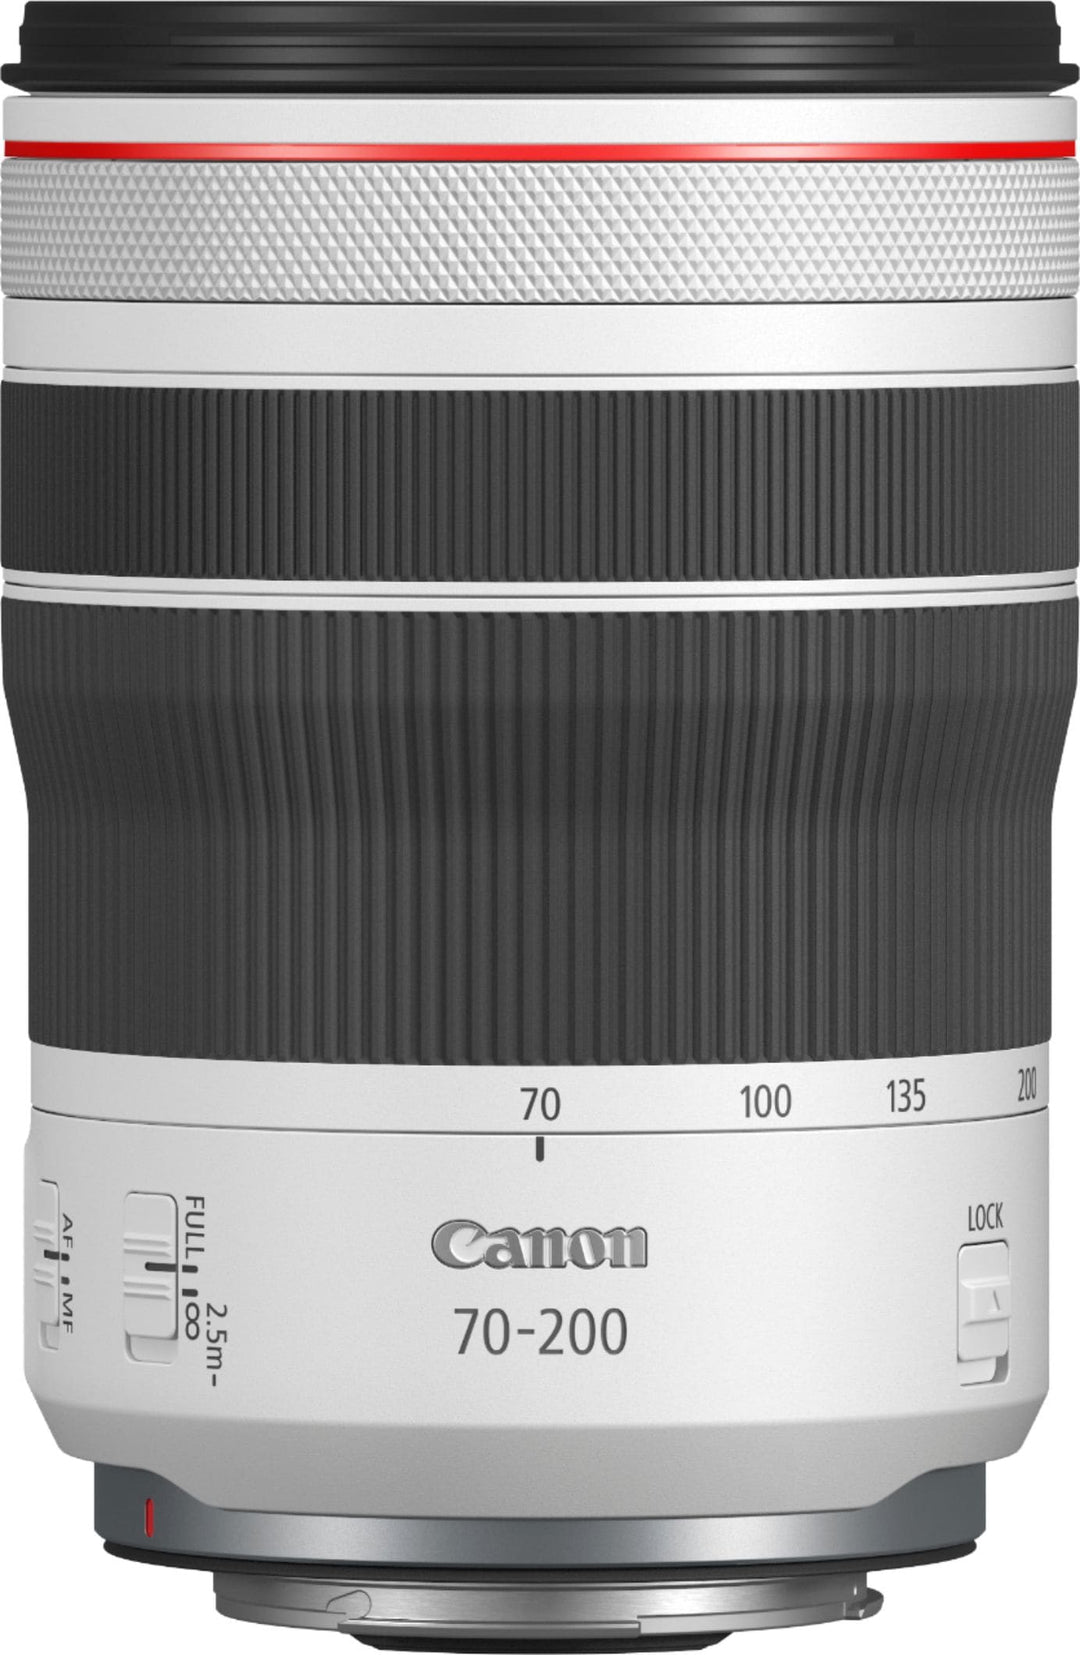 Canon - RF 70-200mm f/4 L IS USM Telephoto Zoom Lens for RF Mount Cameras - White_2